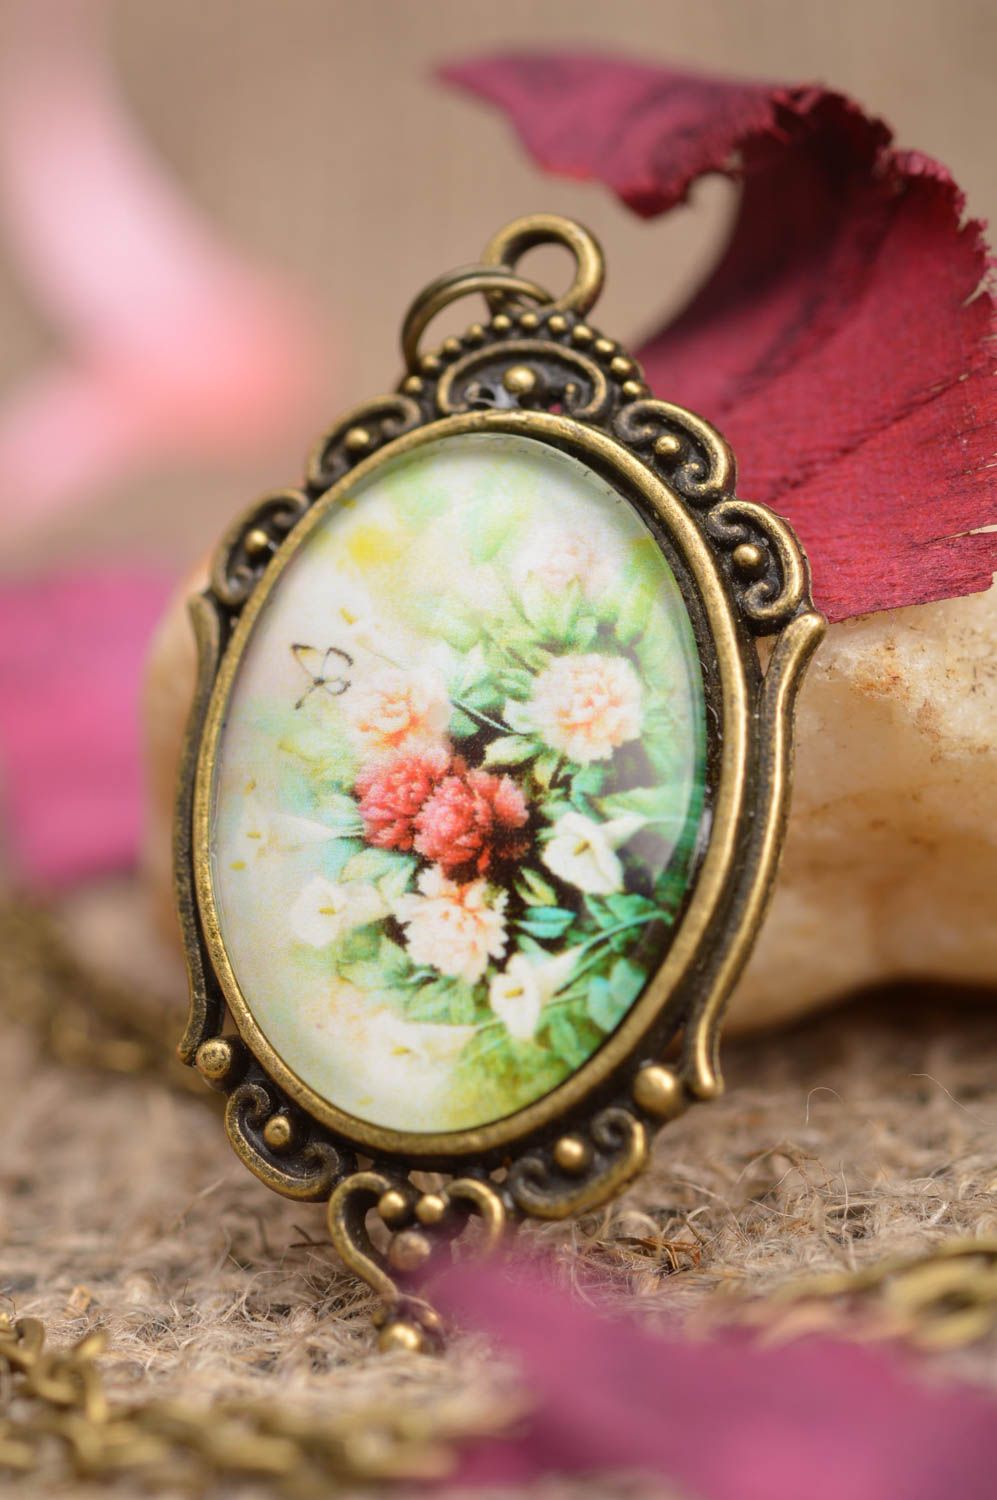 Handmade cute oval pendant on long chain with flowers in vintage style photo 1